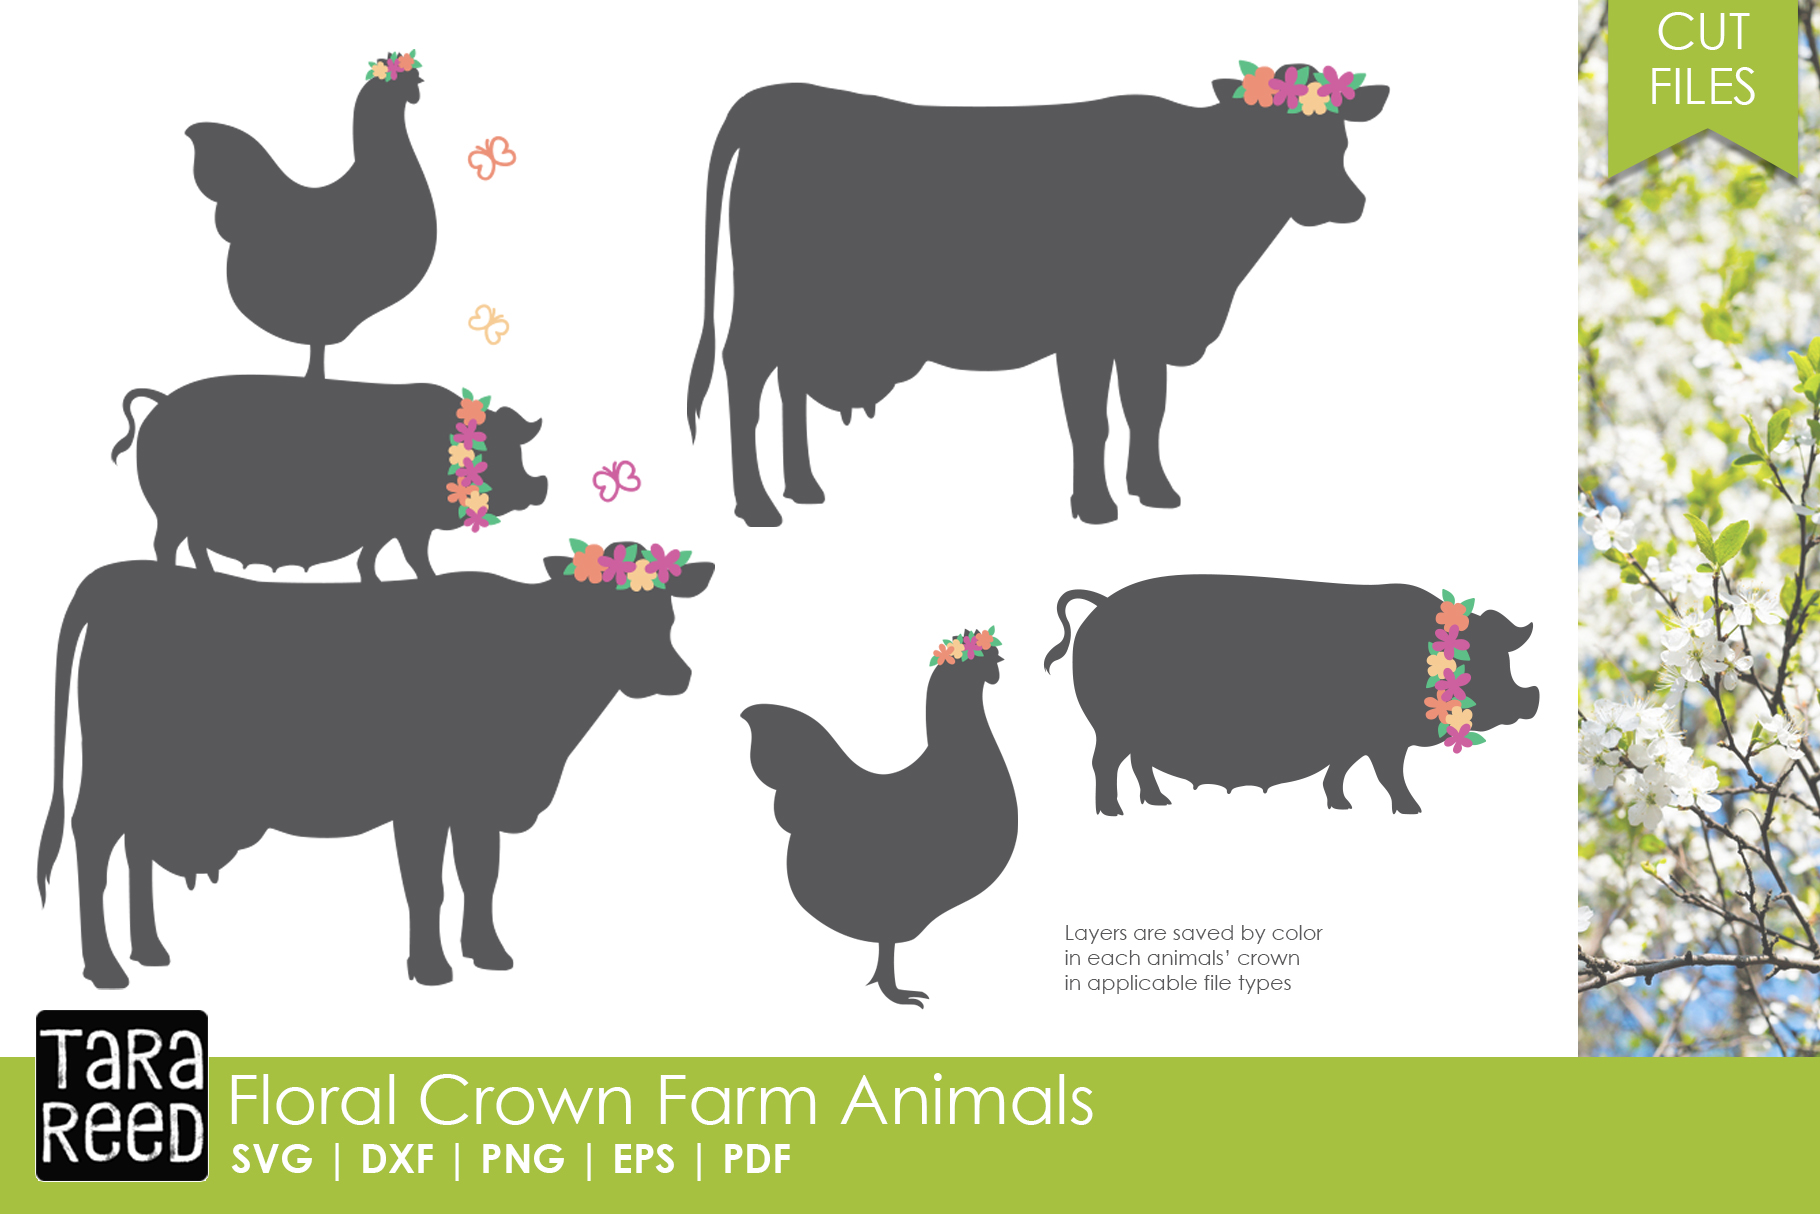 Download Floral Crown Farm Animals - SVG and Cut Files for Crafters